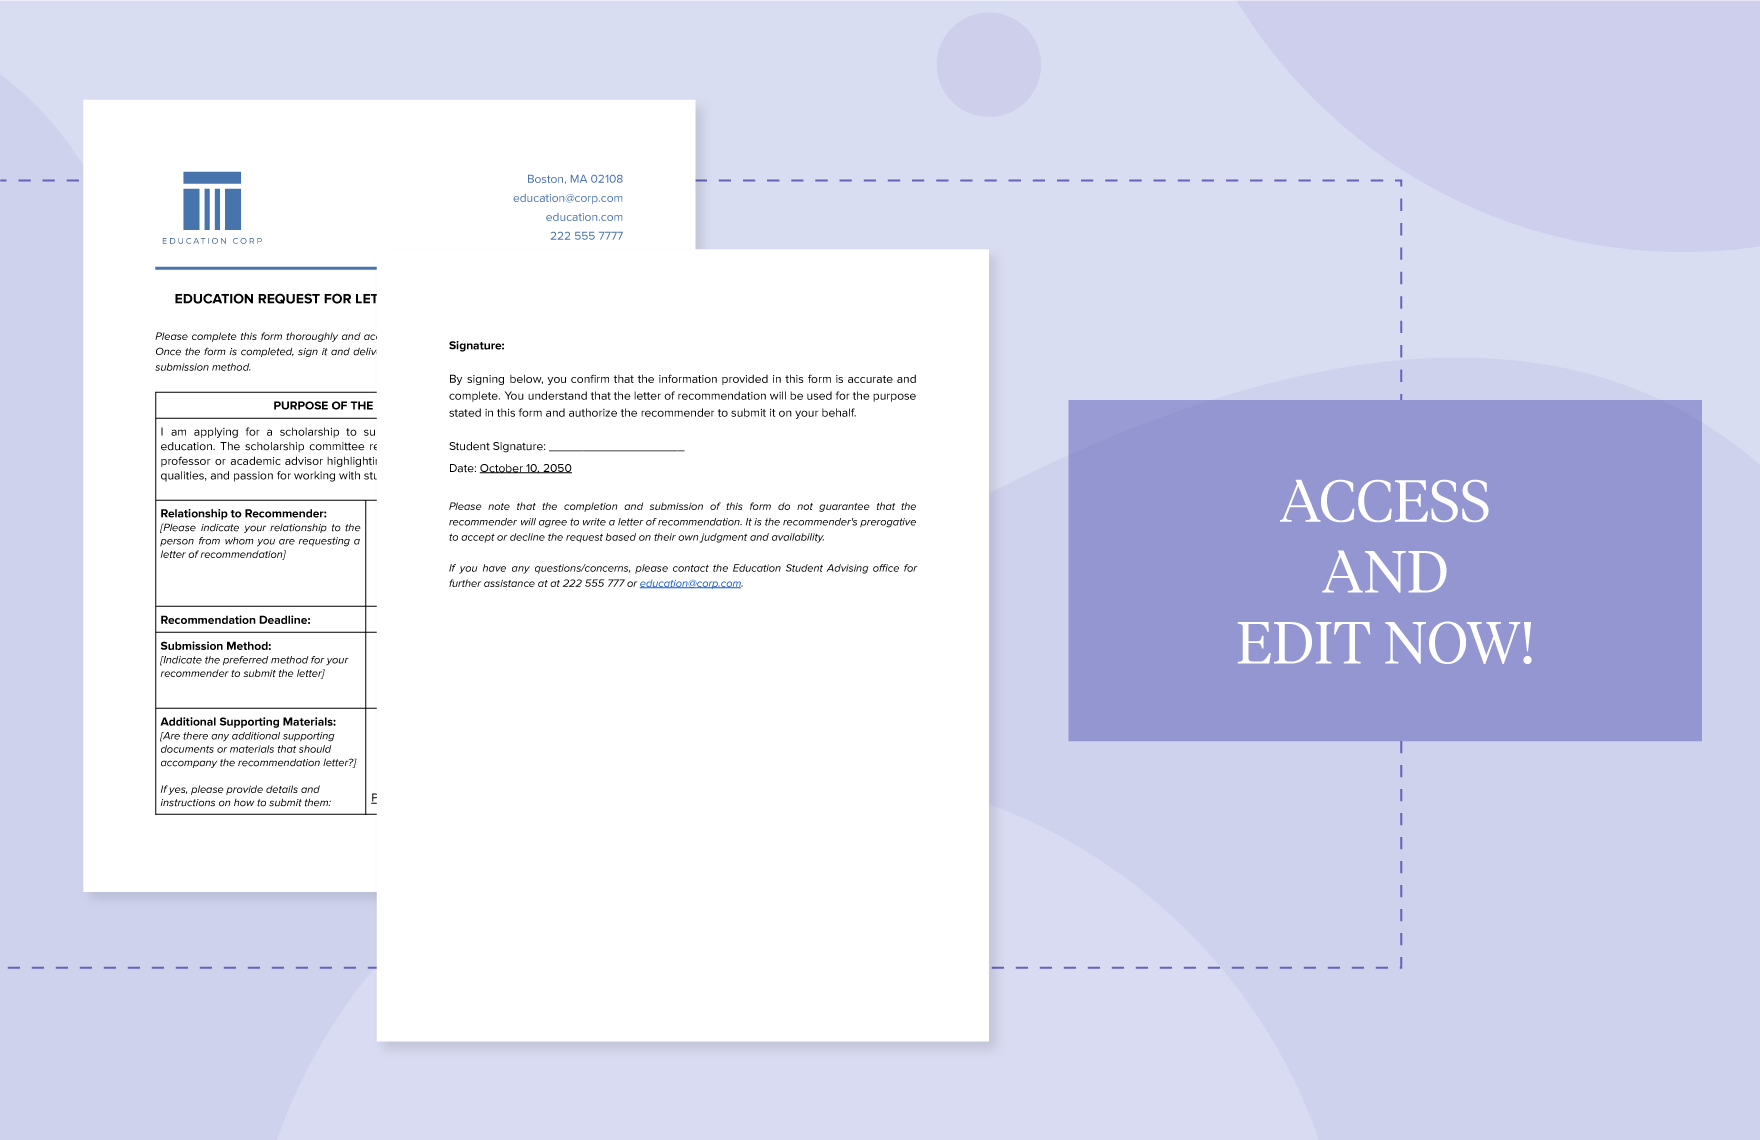 Education Request for Letter of Recommendation Form Template